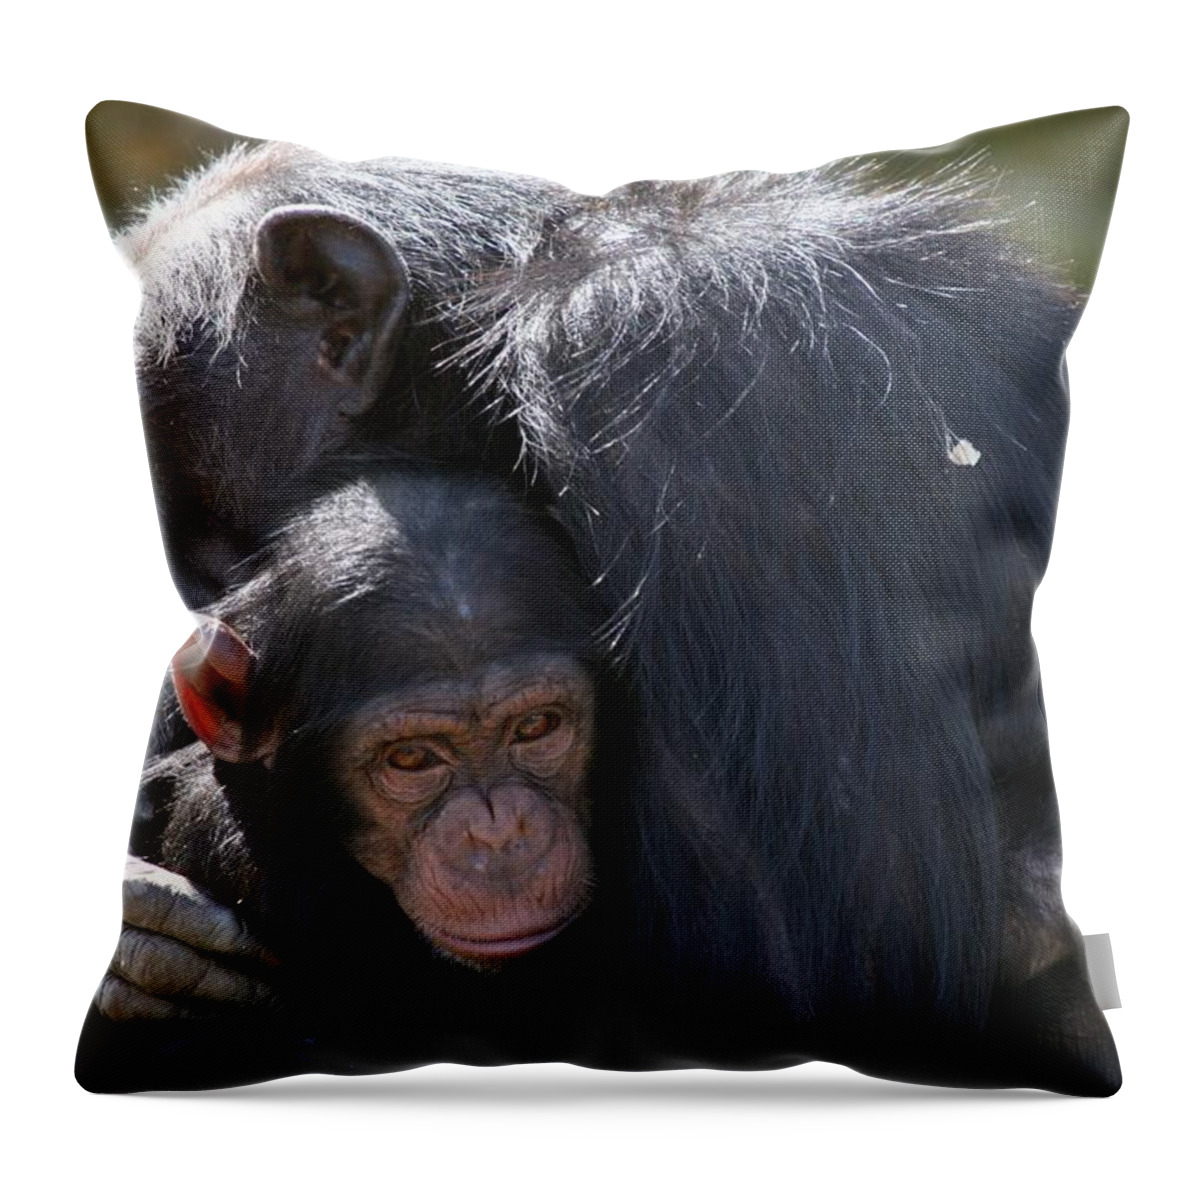 Hug Throw Pillow featuring the photograph Gorillas Embrace - Hugs Heal by Ian McAdie